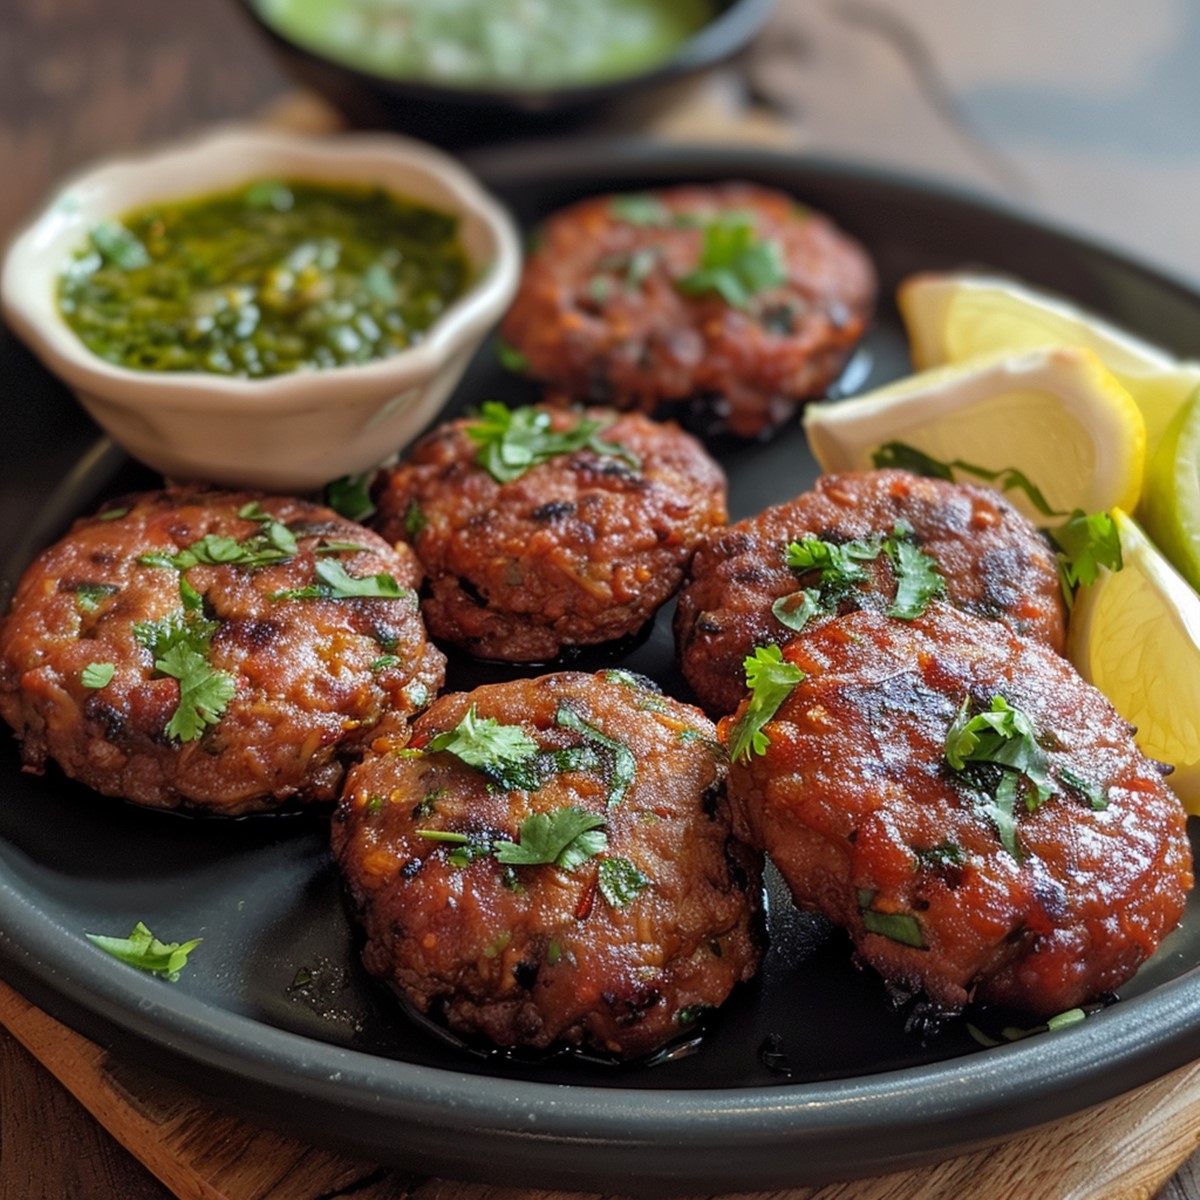 Golden brown Galouti Kebabs garnished with fresh coriander leaves, served with mint chutney and lemon wedges on a rustic wooden table.